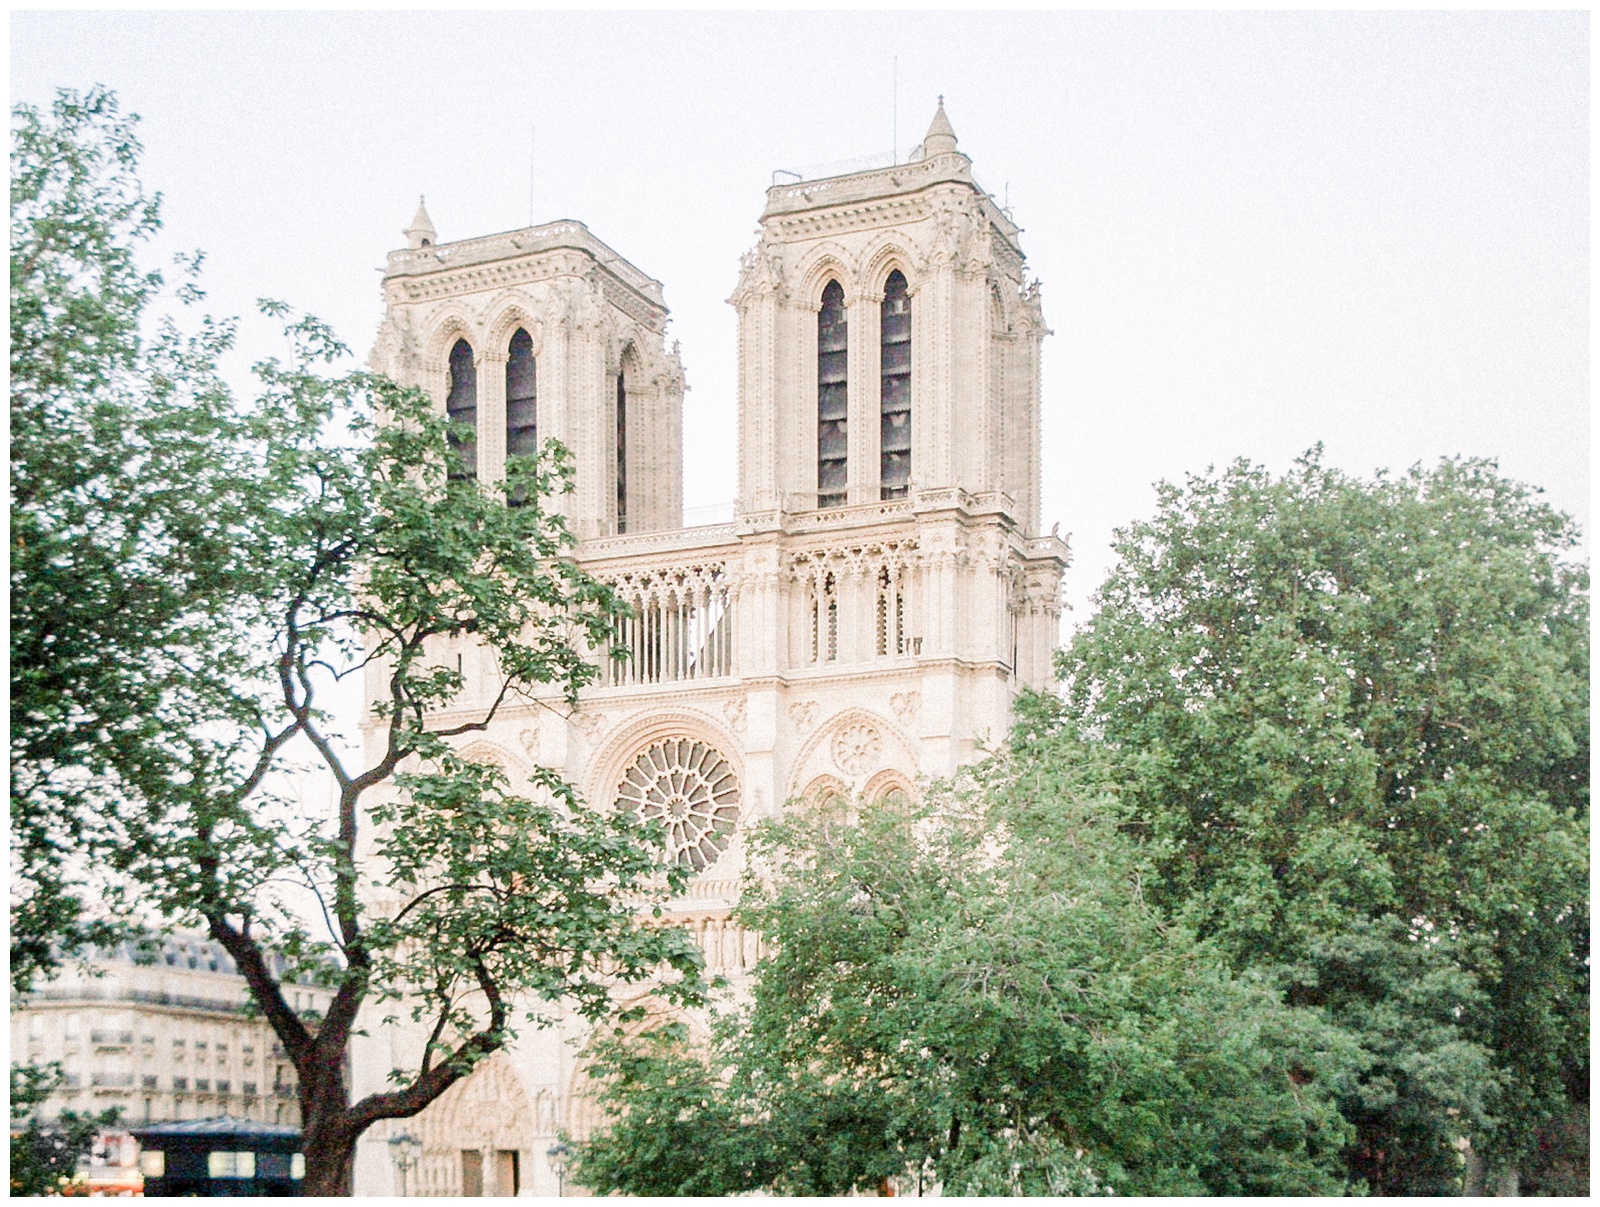 Notre Dame Cathedral, Paris, France, green trees